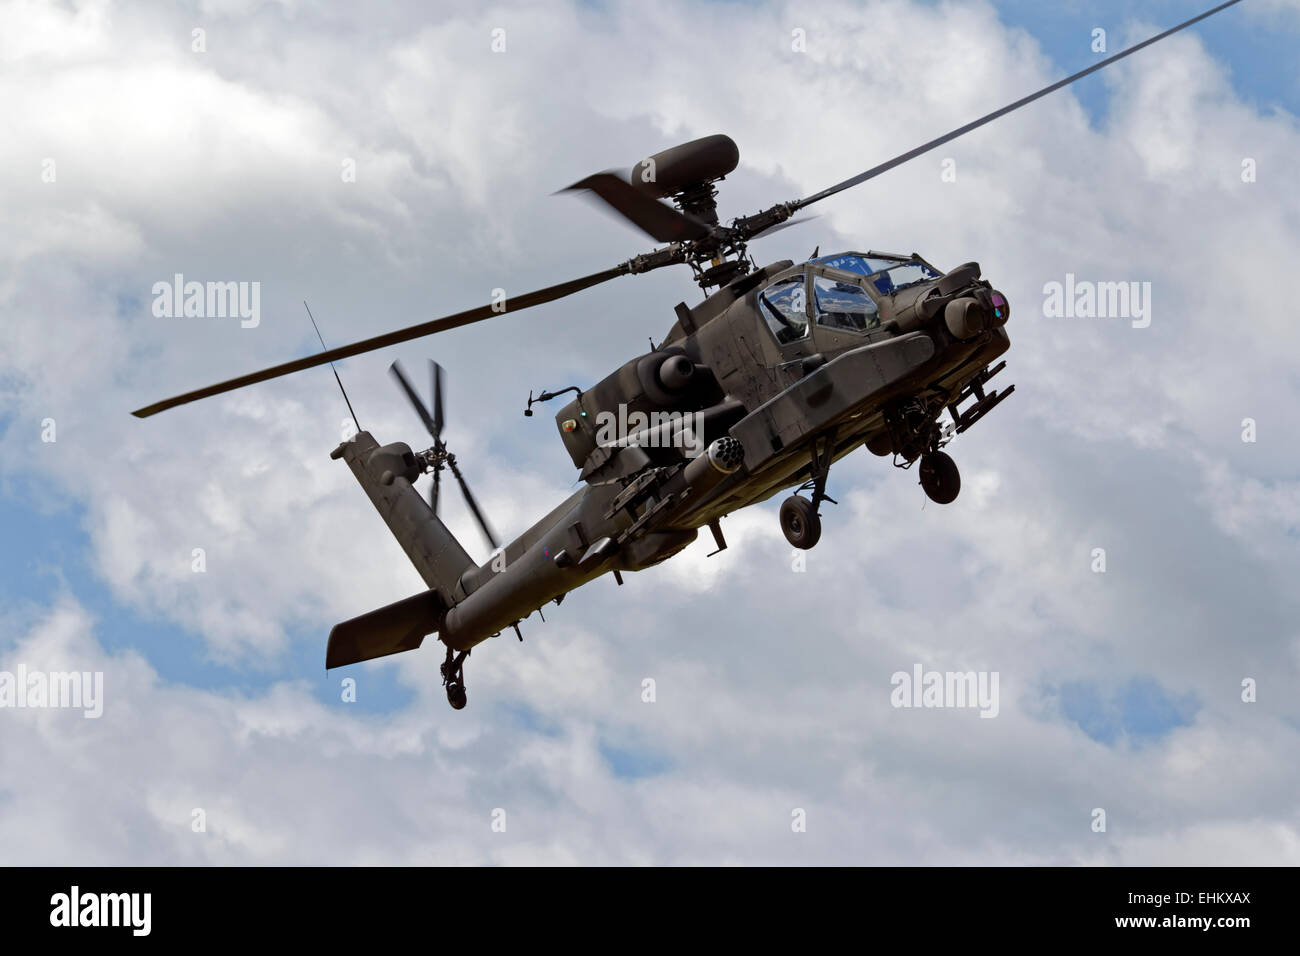 A British Army Air Corps AugustaWestland WAH-64D Apache AH.1 helicopter flies over Salisbury Plain in Wiltshire, United Kingdom. Stock Photo